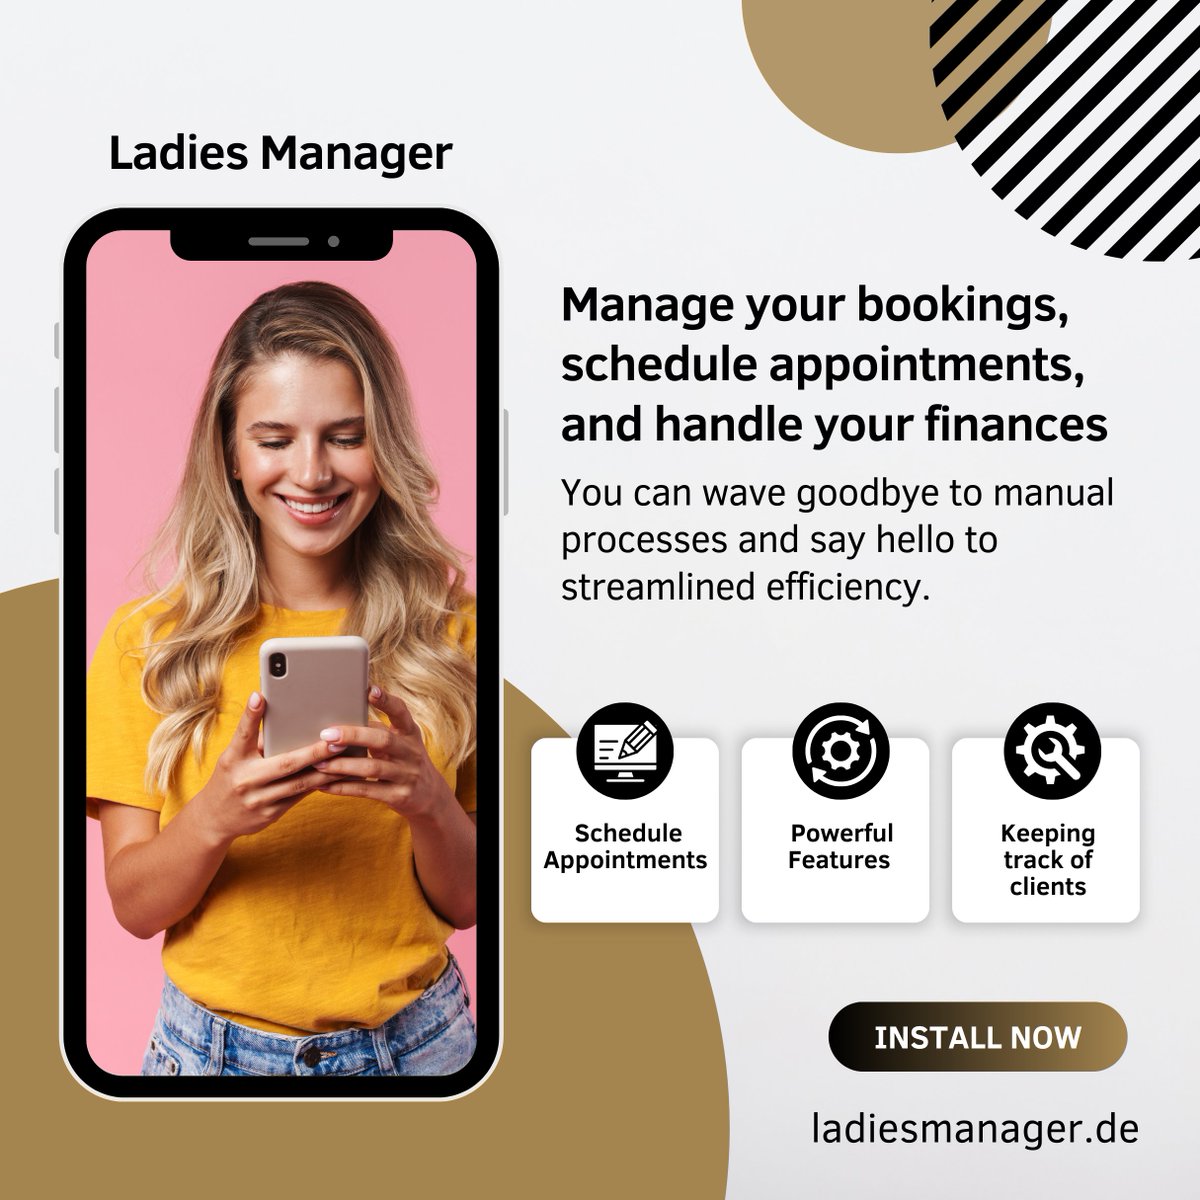 Efficiency at Your Fingertips:
With Ladies Manager, you can wave goodbye to manual processes and say hello to streamlined efficiency.

#LadiesManager #EmpoweringEscorts #EfficiencyAtYourFingertips #StreamlinedBusiness #TimeSaver #ExceptionalServices #EnhancedSafety #SecureApp